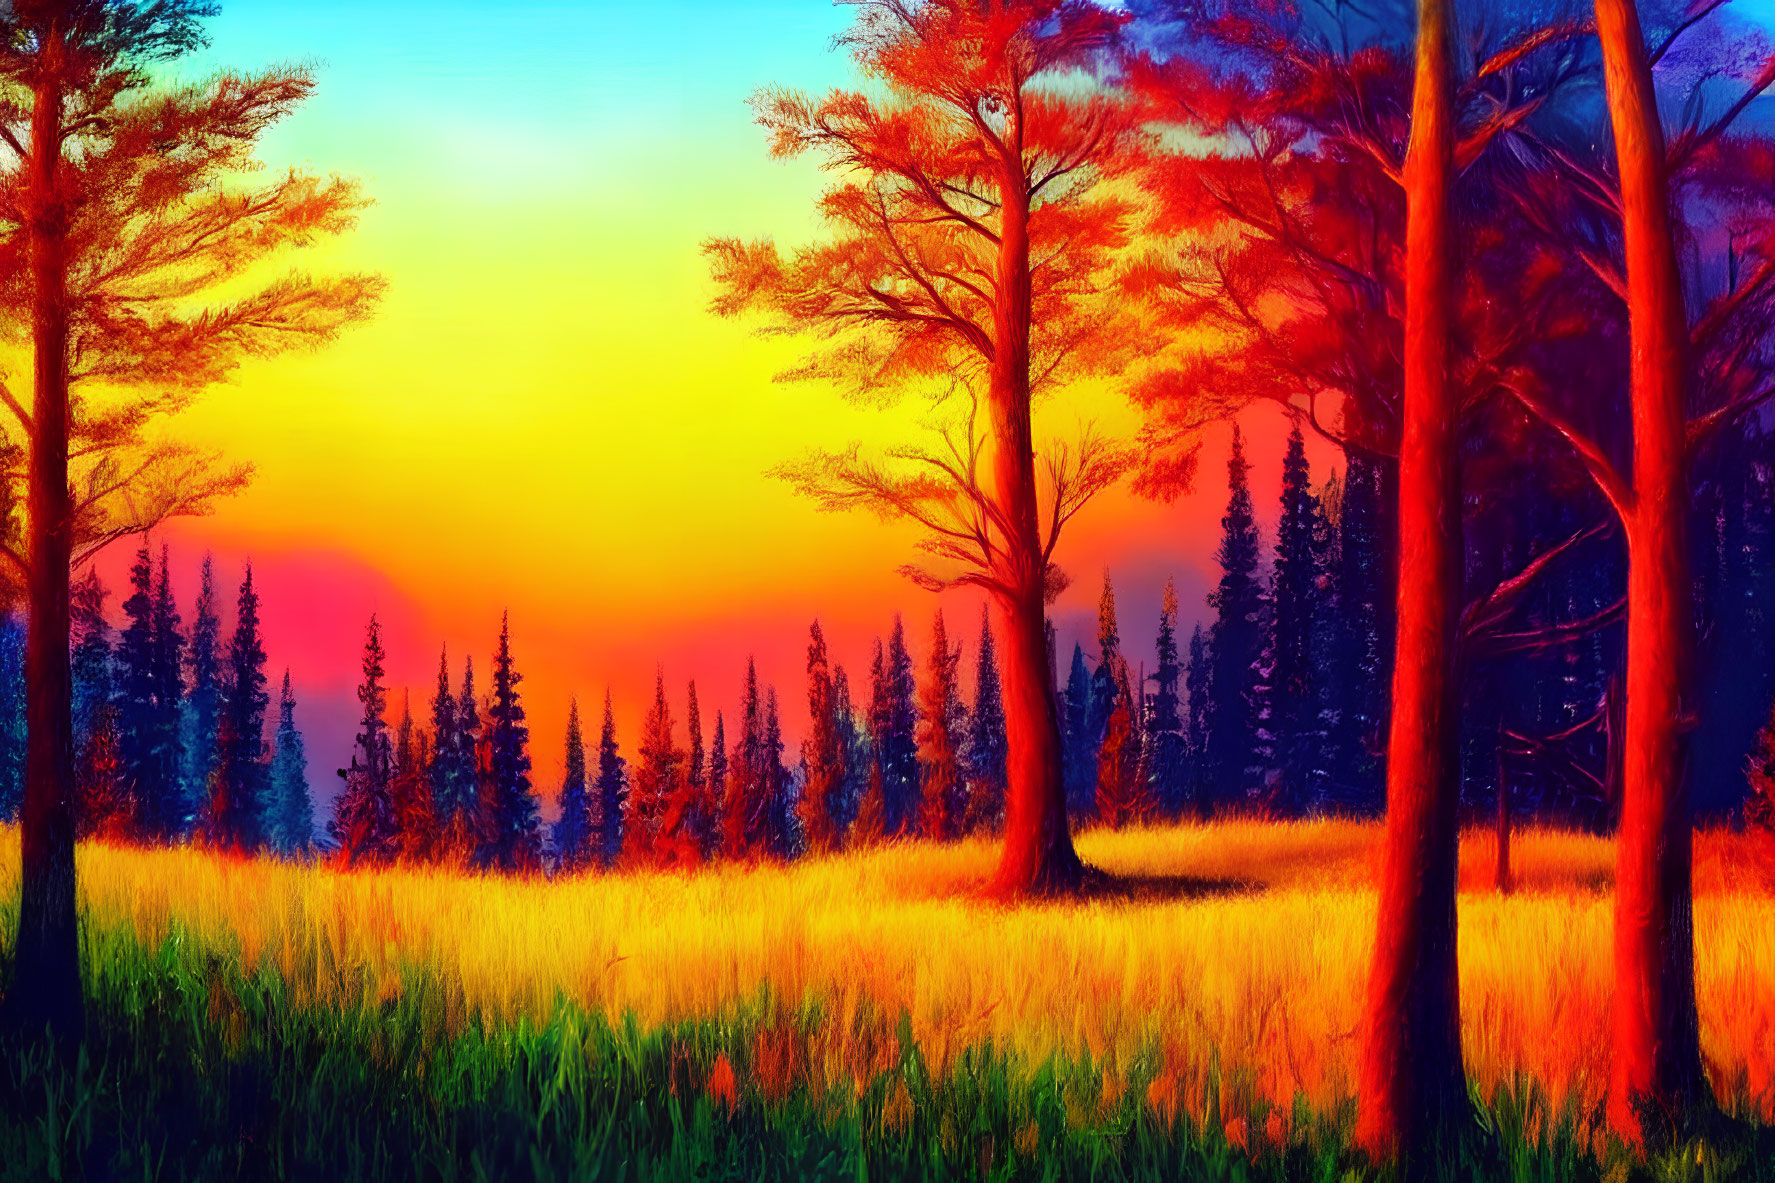 Colorful Sunset Forest Landscape with Silhouetted Pine Trees